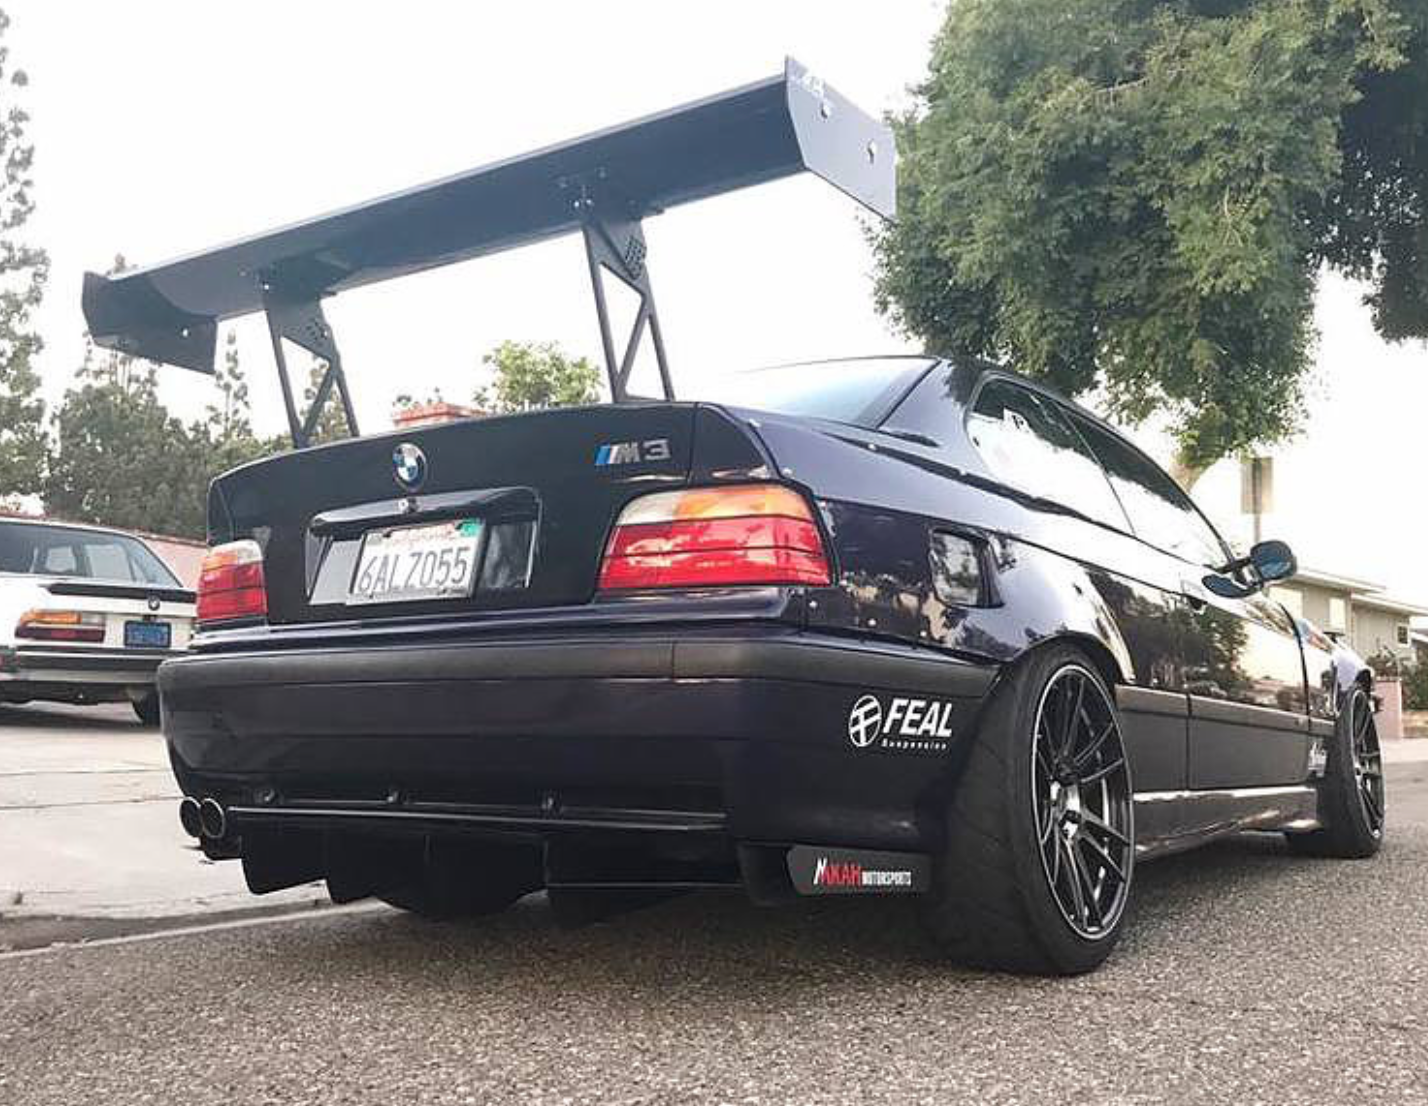 ROOF SPOILER BMW E36 COUPE – FULL GAS